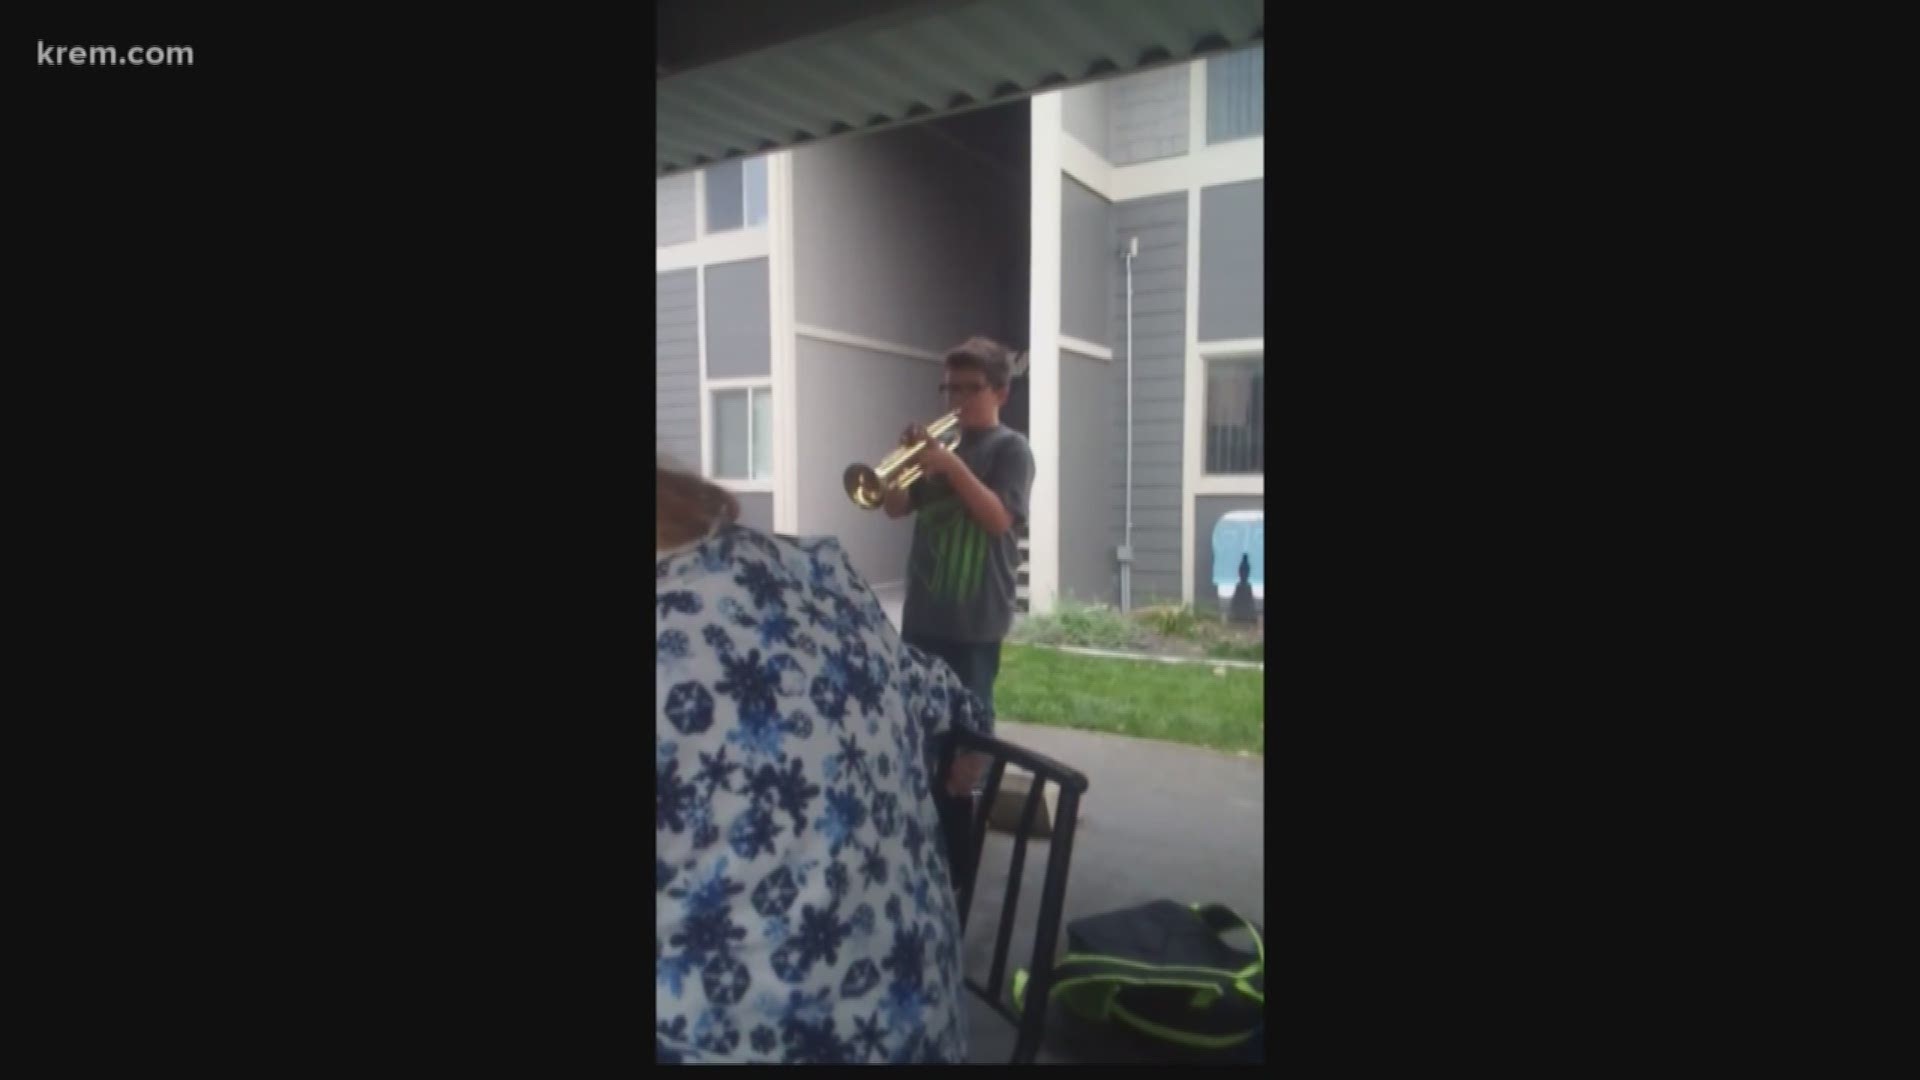 When the Lilac City Community Band heard a local student needed a trumpet - members jumped at the opportunity to help.